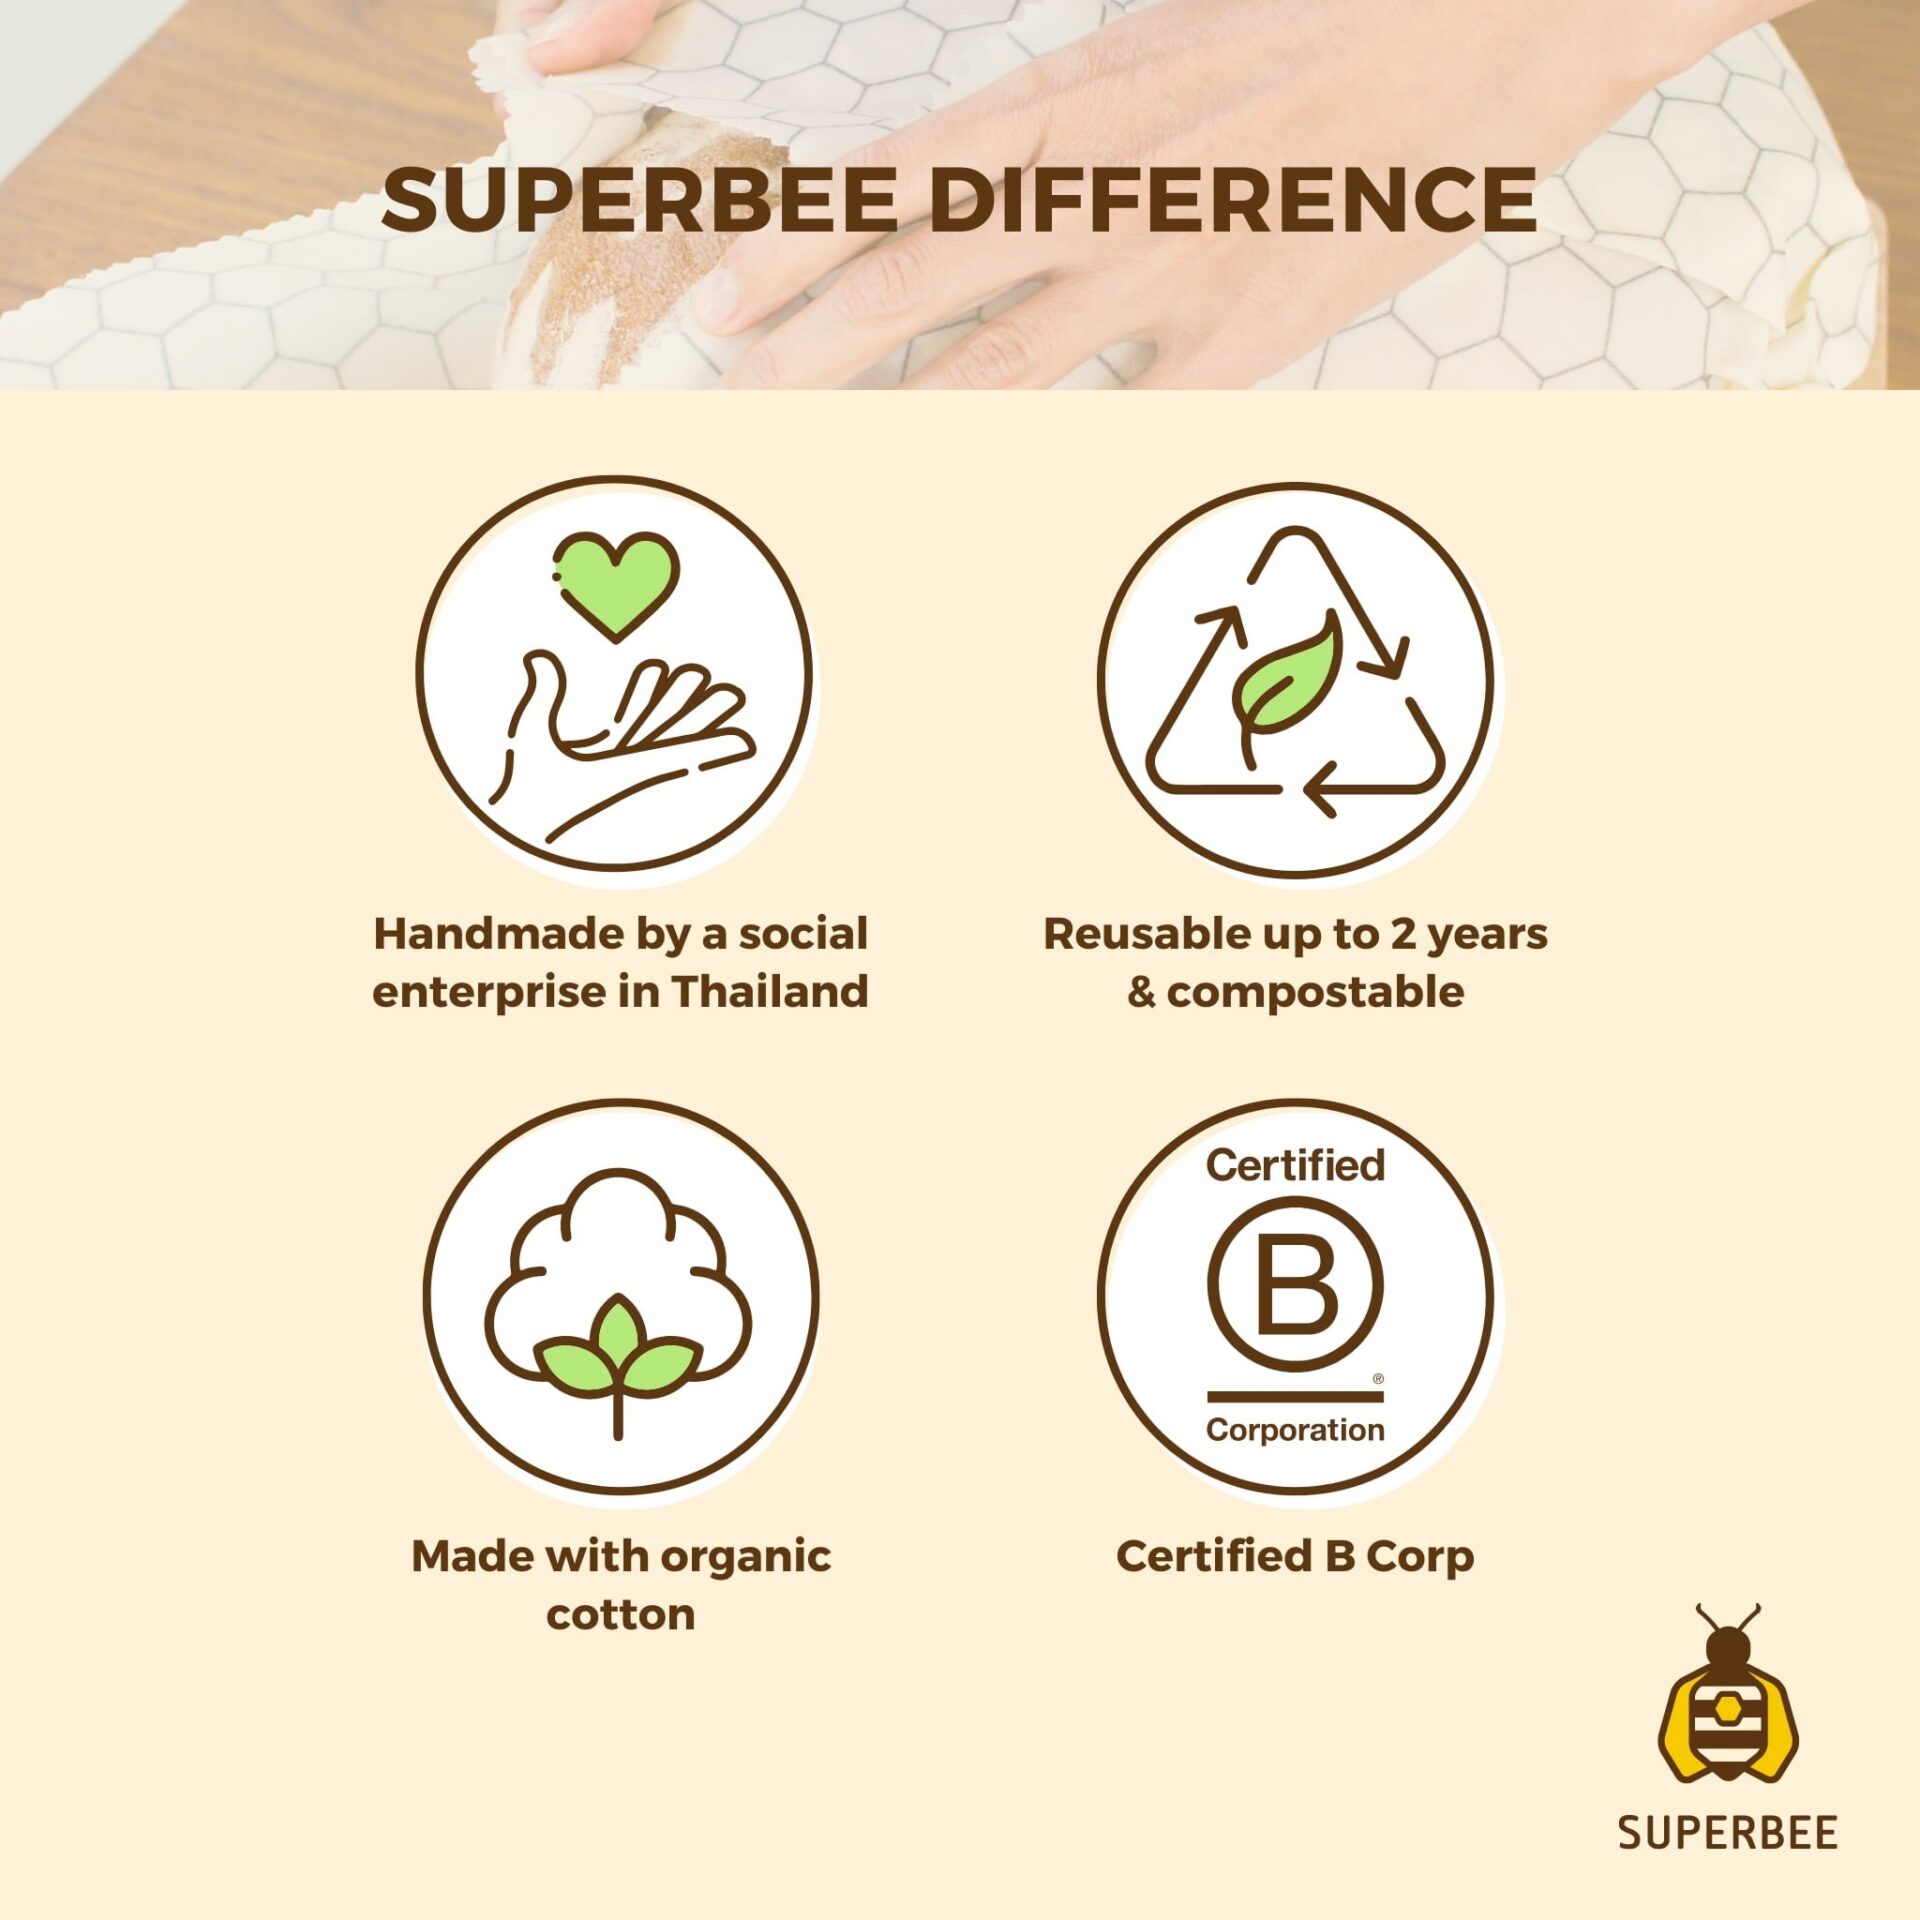 Buy SUPERBEE Beeswax Wrap for Food, Set of 3 Bees Wax Wraps, Reusable Bees  Wrap Paper for Wrapping Vegetables, Cheese Paper, Covers and Sandwich  Wrapping Paper, Beeswax Food Wraps Size S/M/L Online